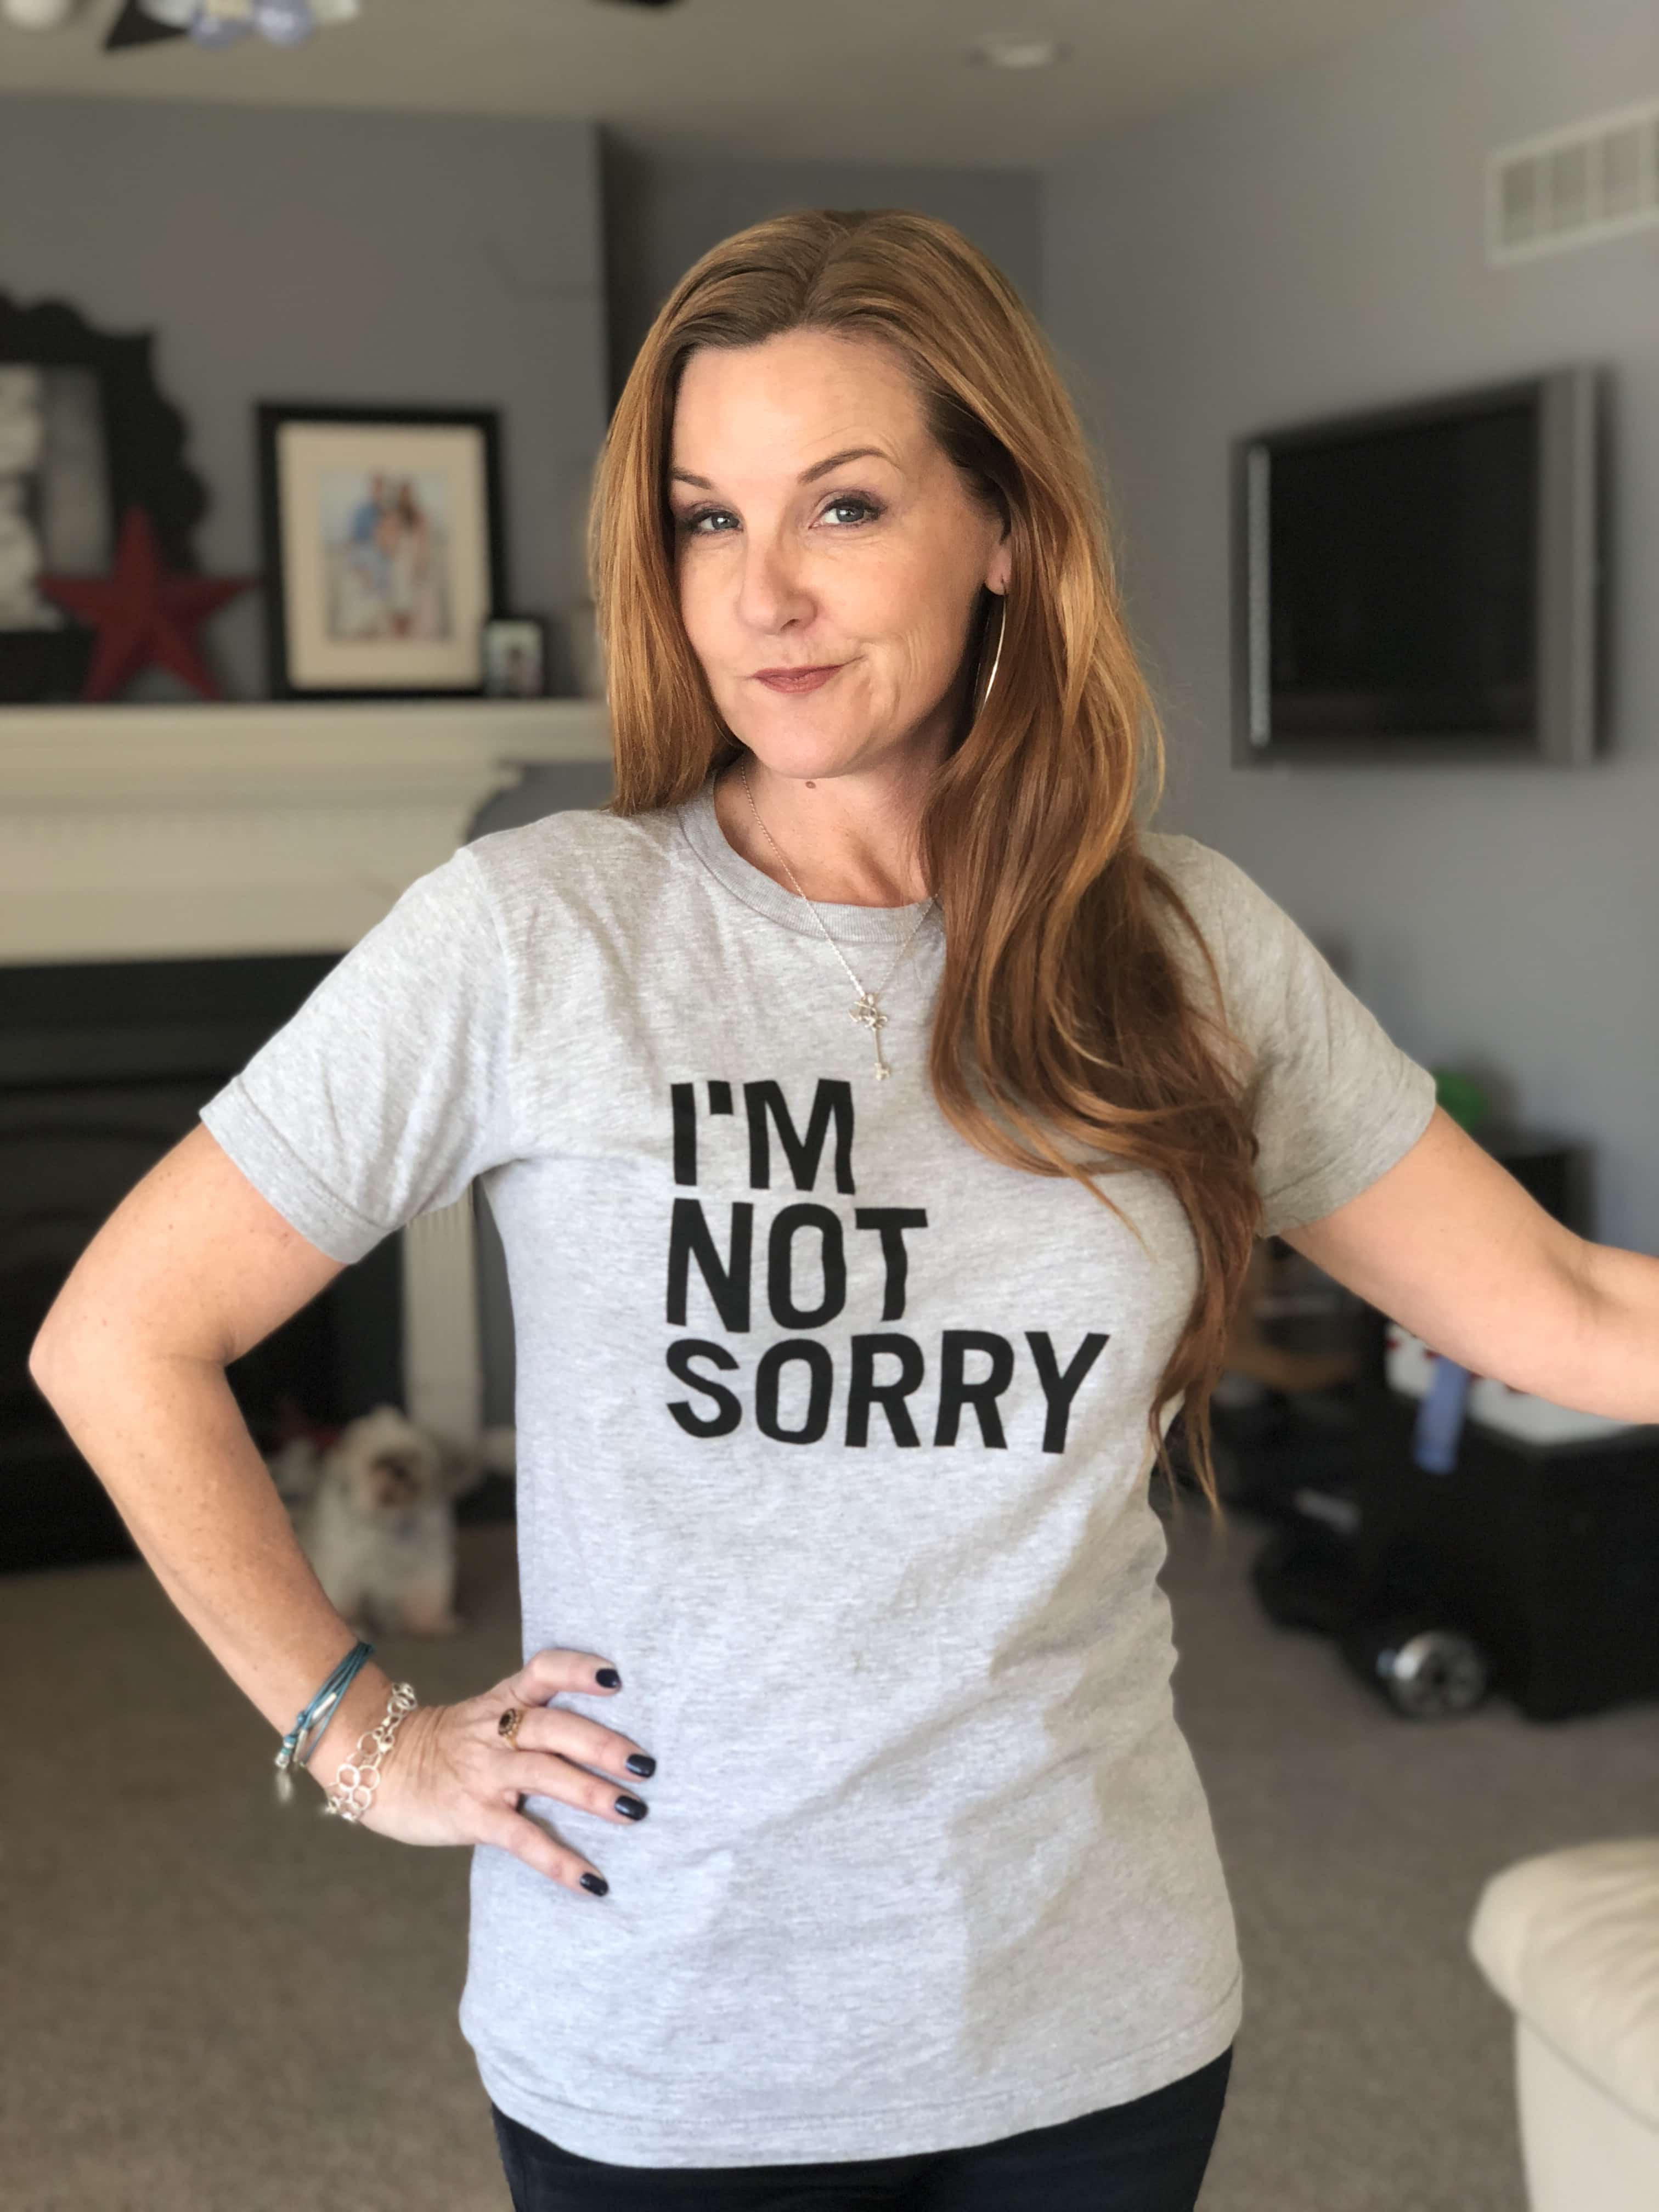 Go Graphic - Why I Love Shirts With a Message - I'm not sorry